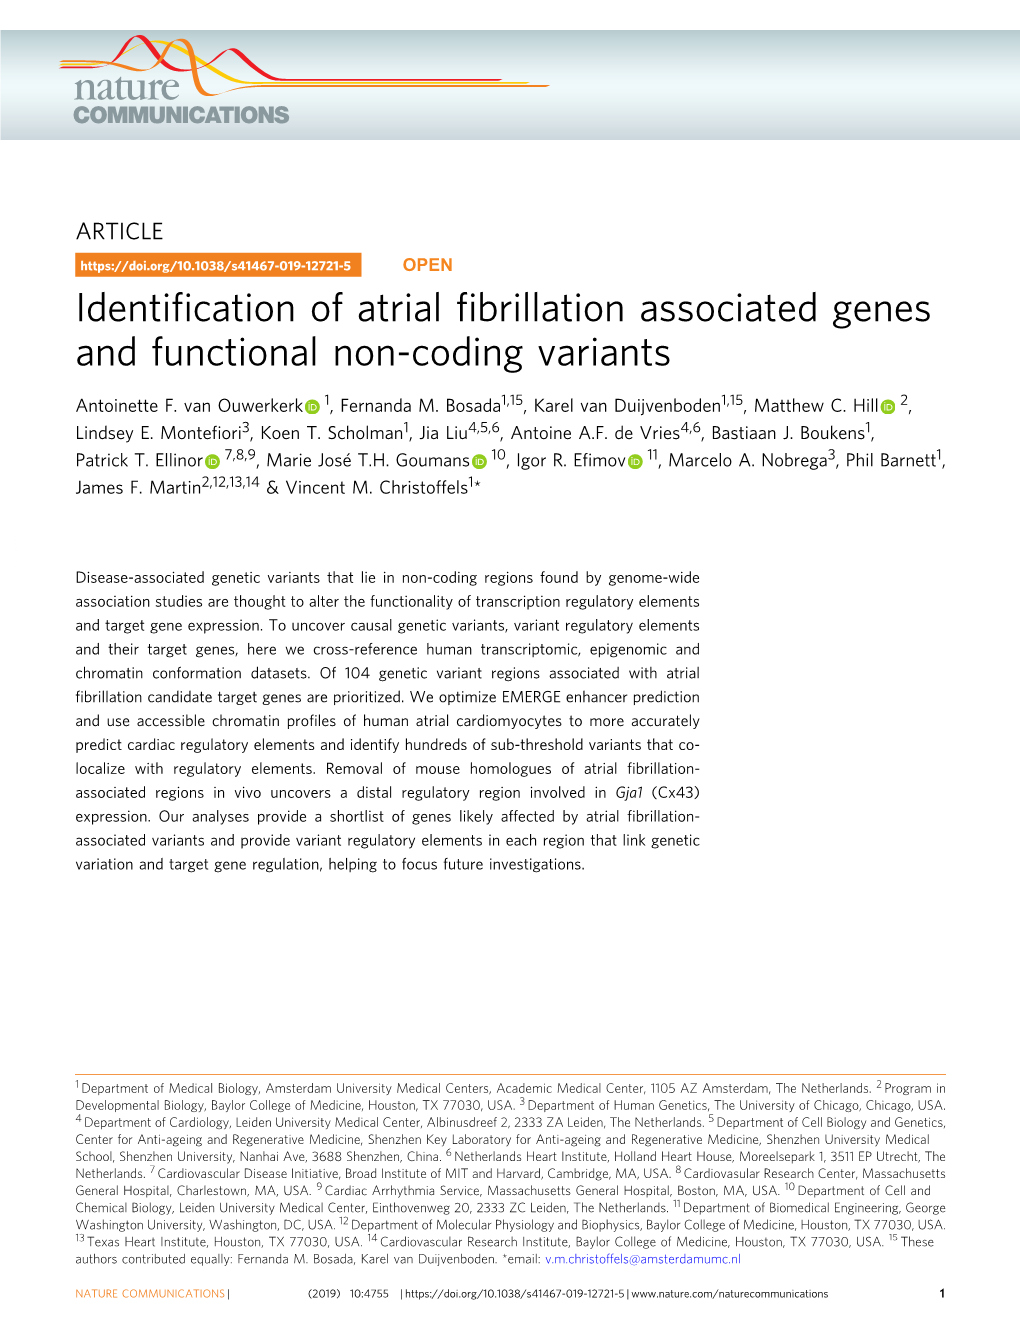 Identification of Atrial Fibrillation Associated Genes and Functional Non-Coding Variants